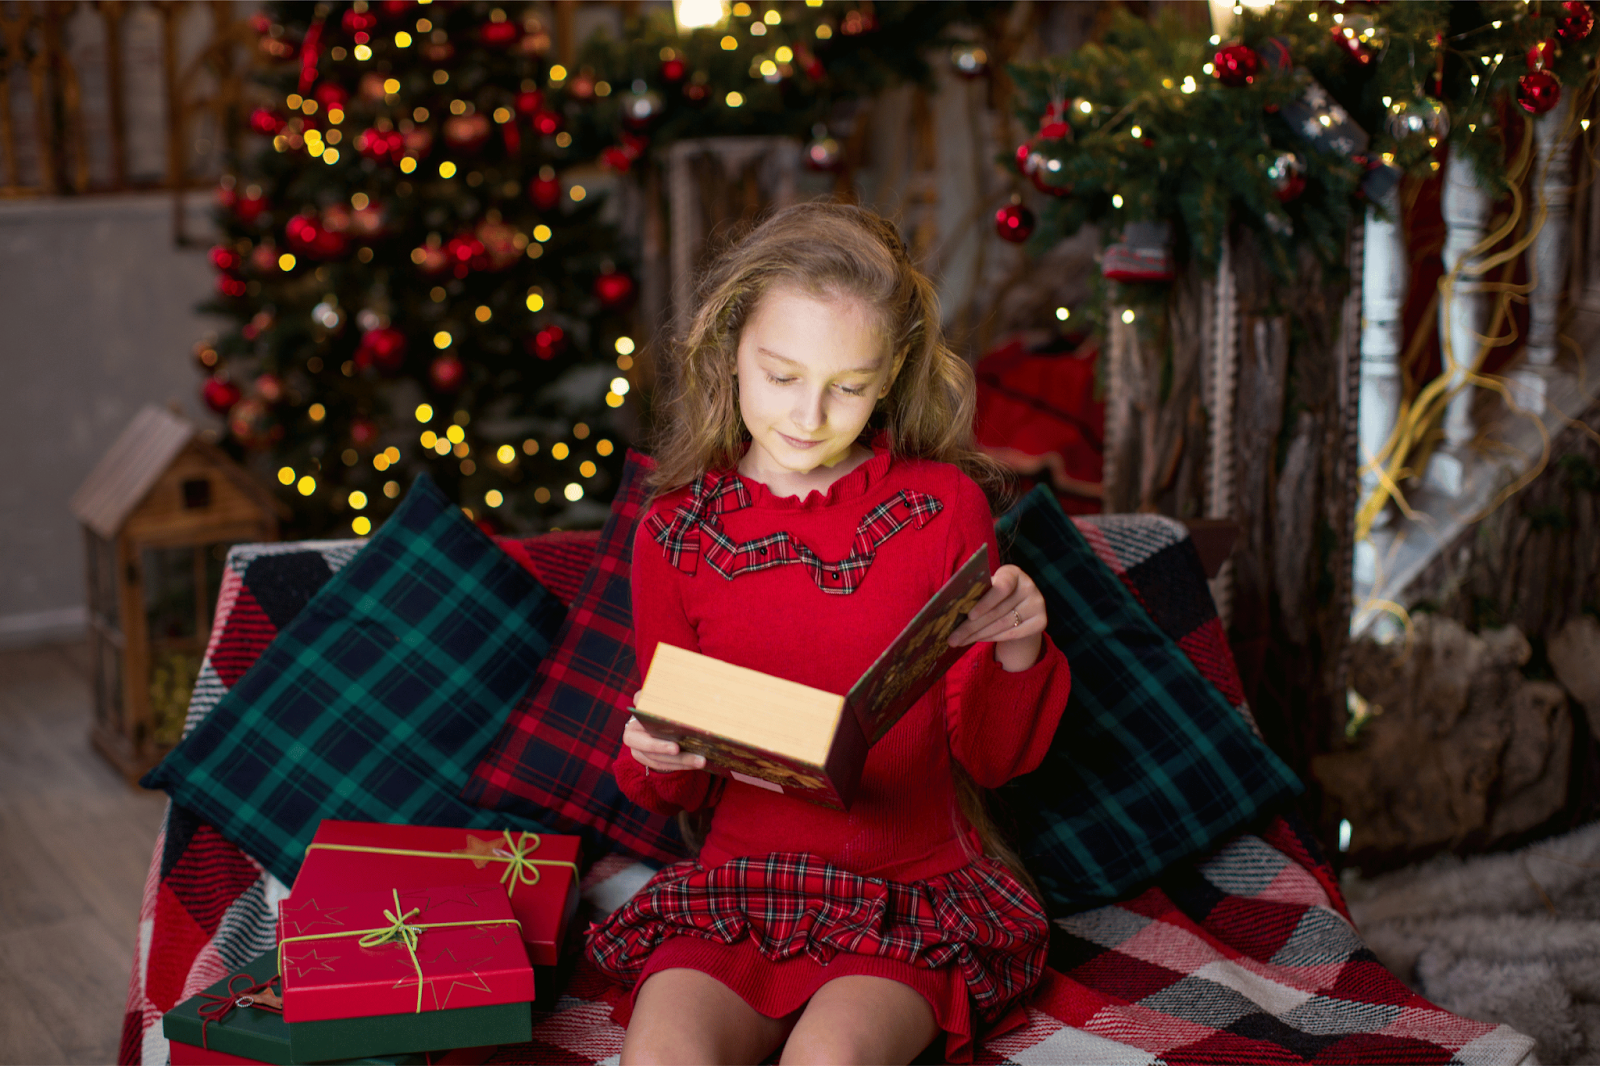 Girl in plaid dress reading a book on a Christmas background